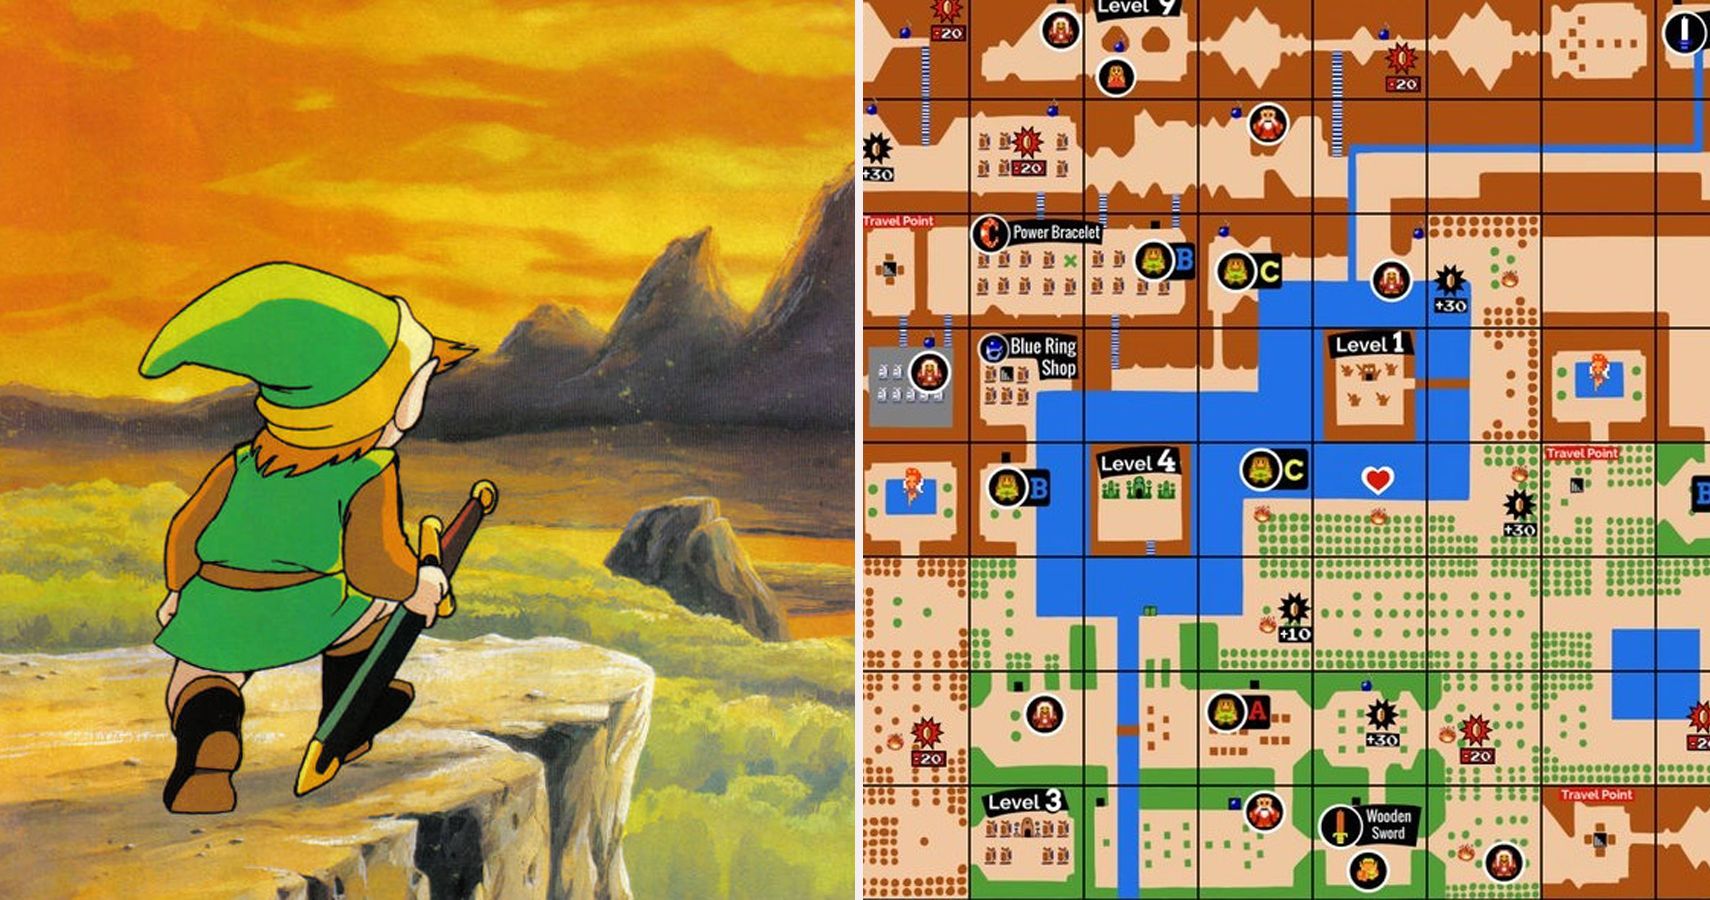 Zelda On Nes Every Bombable Wall In Hyrule And Where To Find Them - Photos